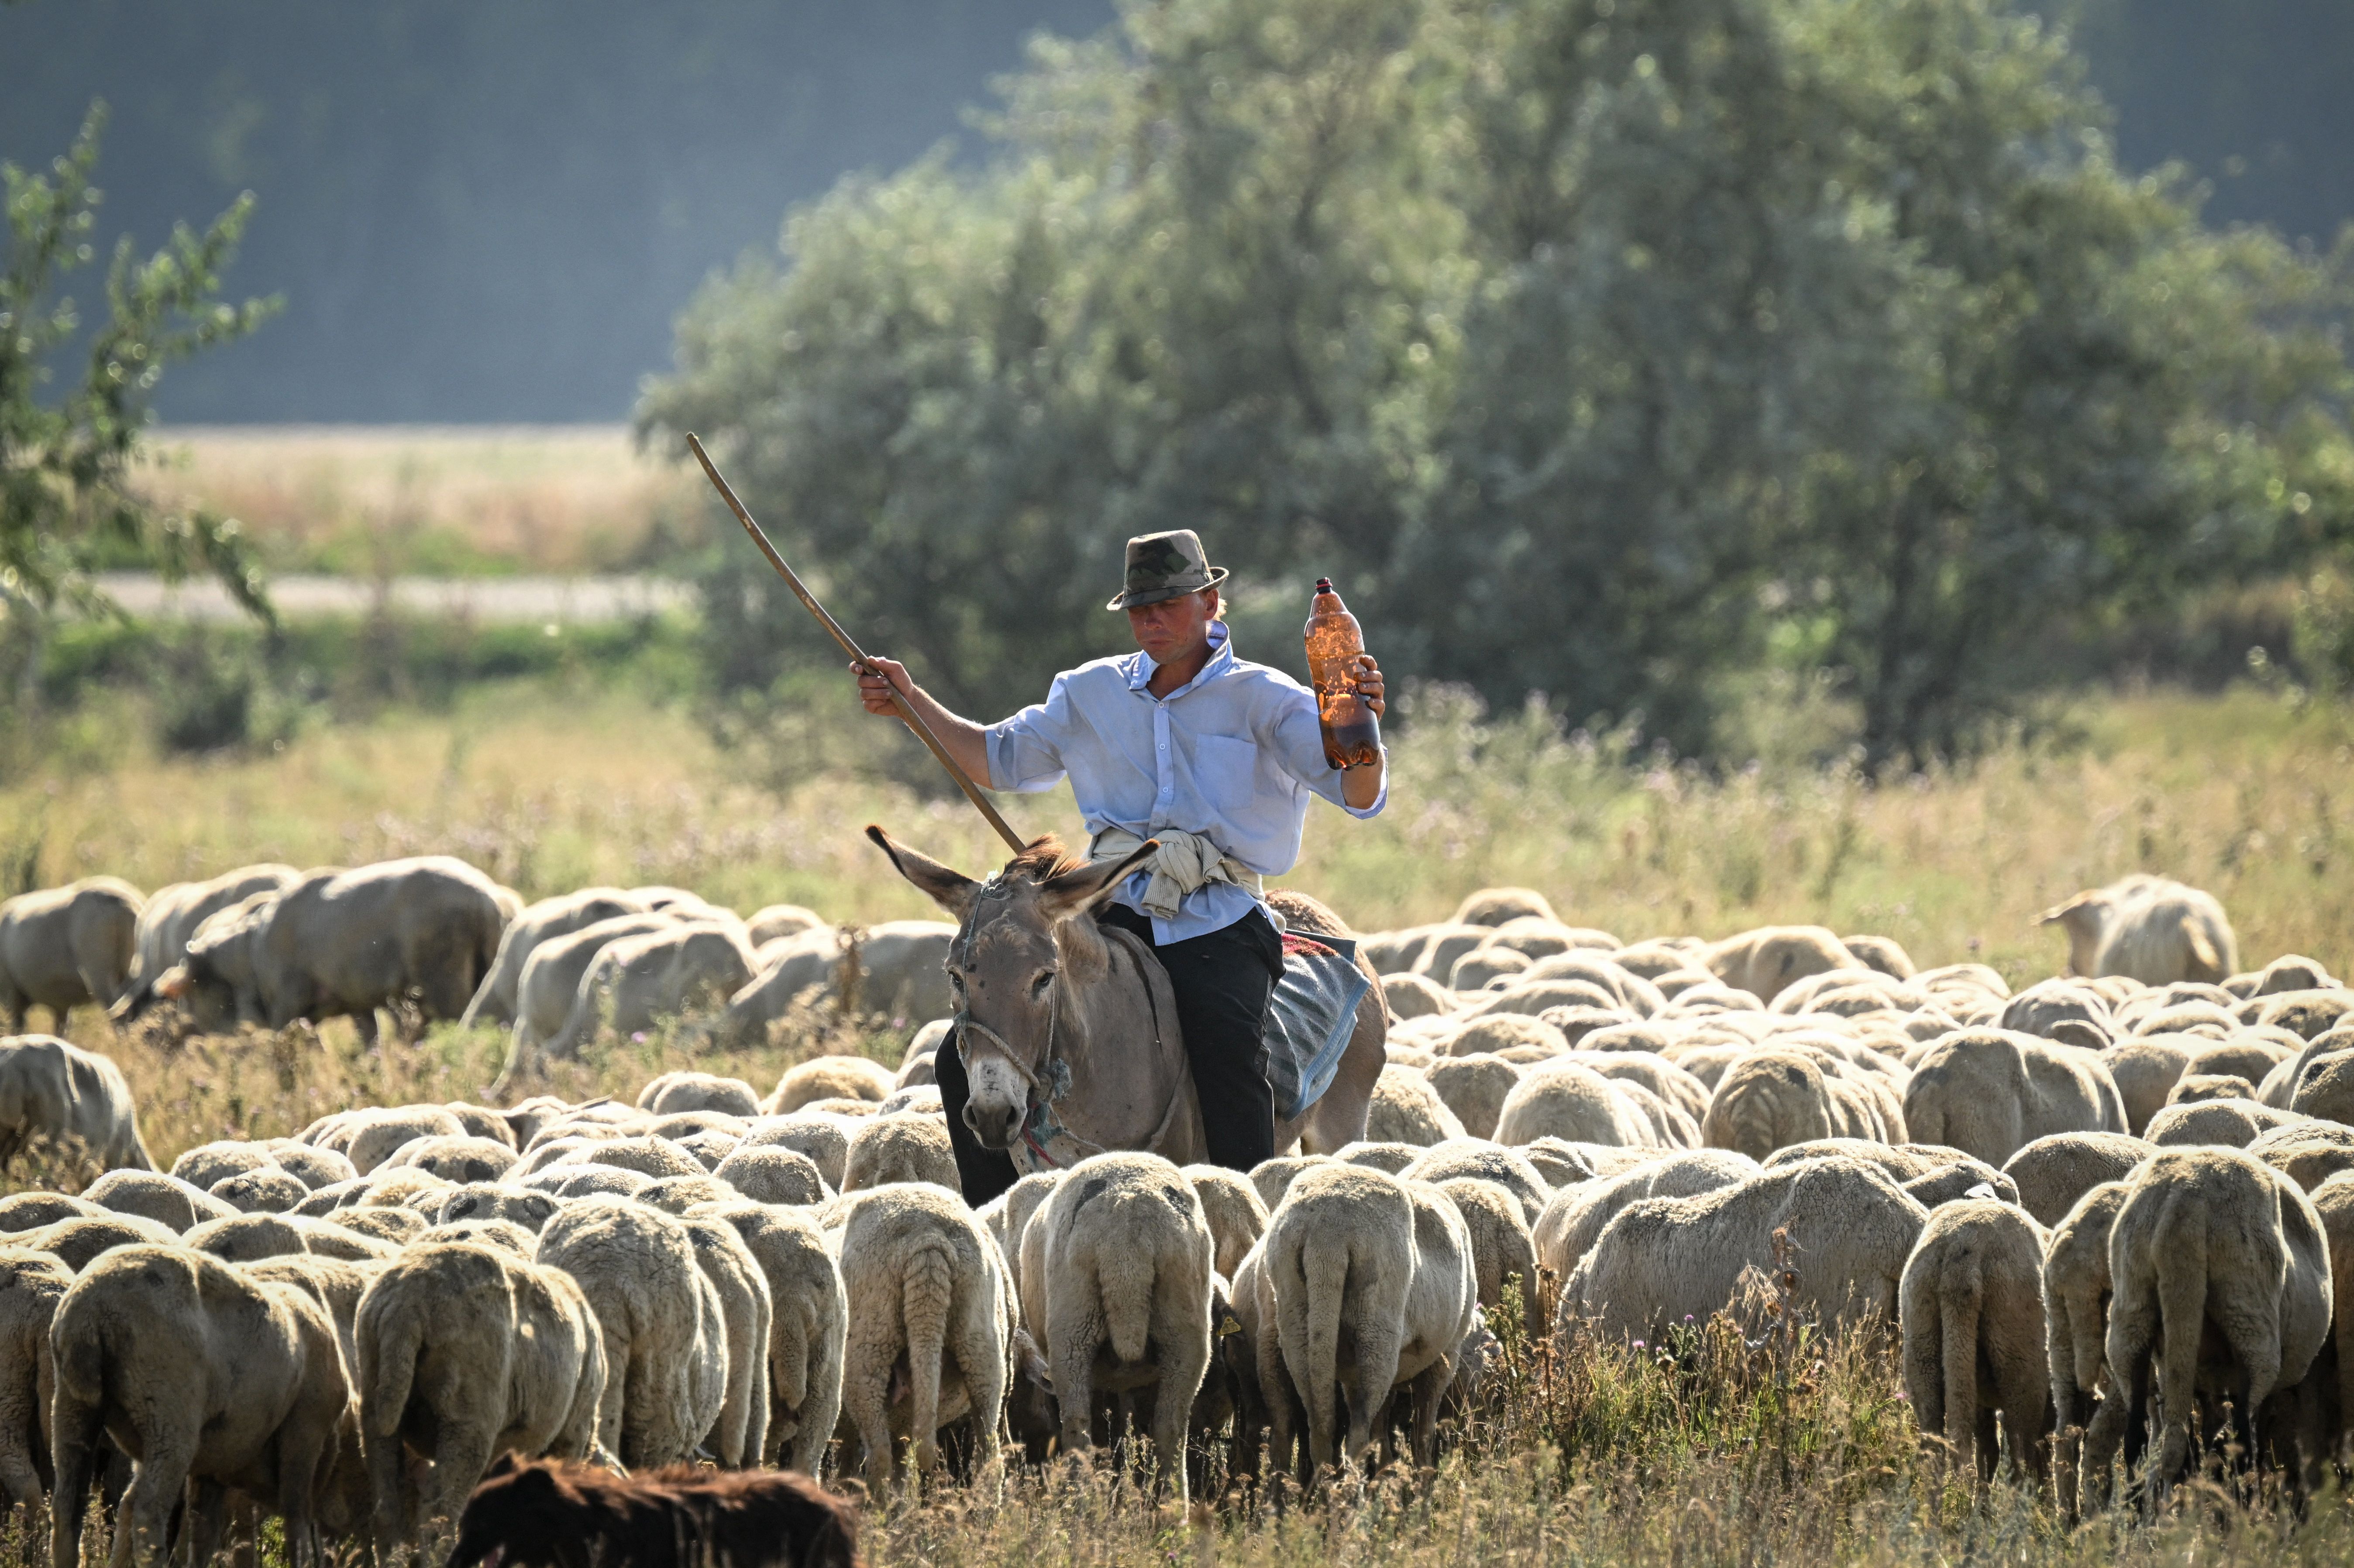 A Romanian shepherd sitting on a donkey takes care of his herd of sheep while holding a large beer bottle in his hand on a warm day near Frecatei village in the eastern Dobrogea region of Romania, on July 17, 2023. Romania currently experiences an extreme heat wave in the west and south of the country with temperatures reaching up to 40 degrees Celsius. 